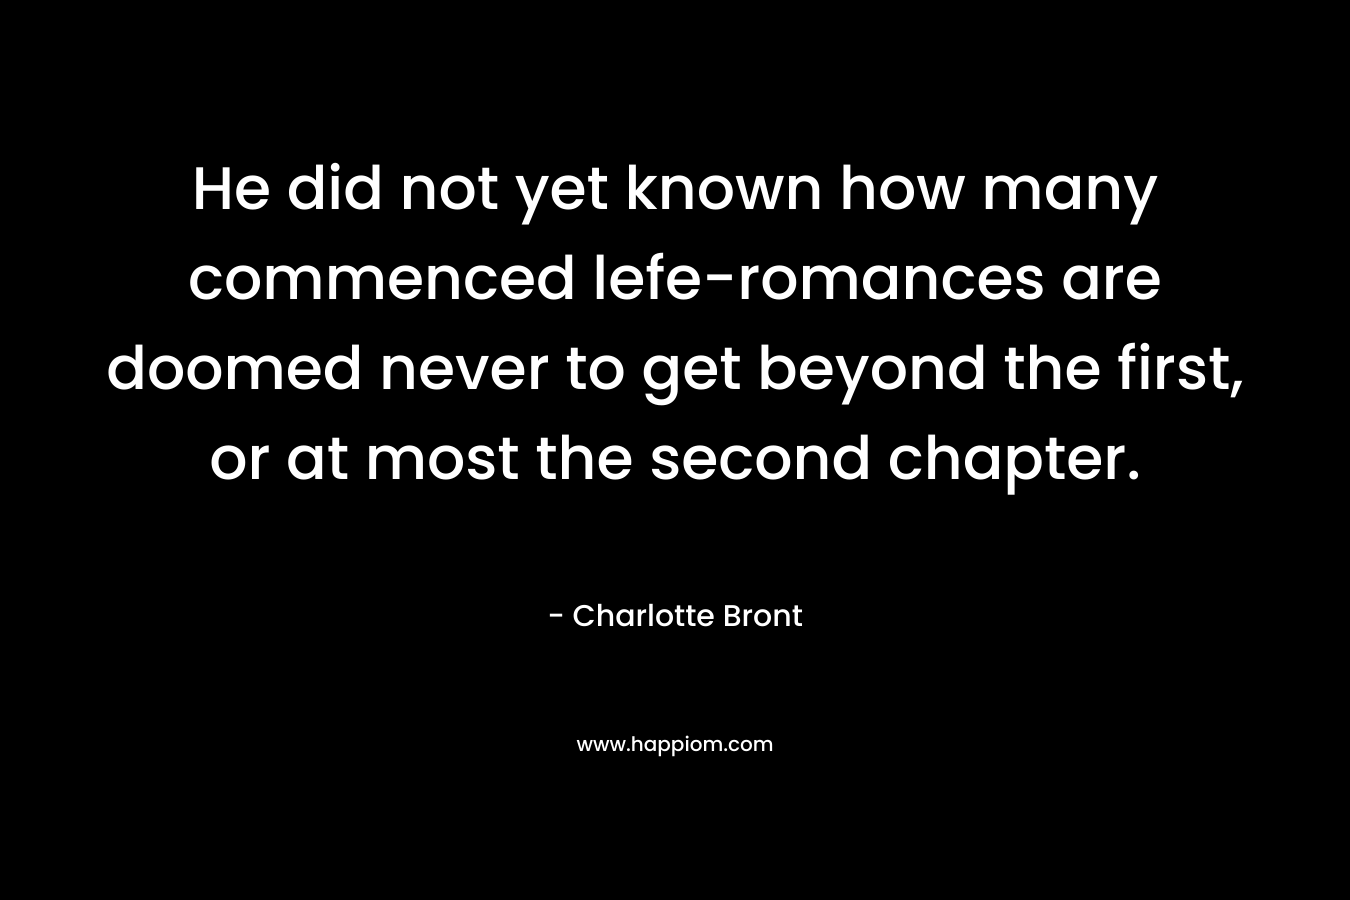 He did not yet known how many commenced lefe-romances are doomed never to get beyond the first, or at most the second chapter.